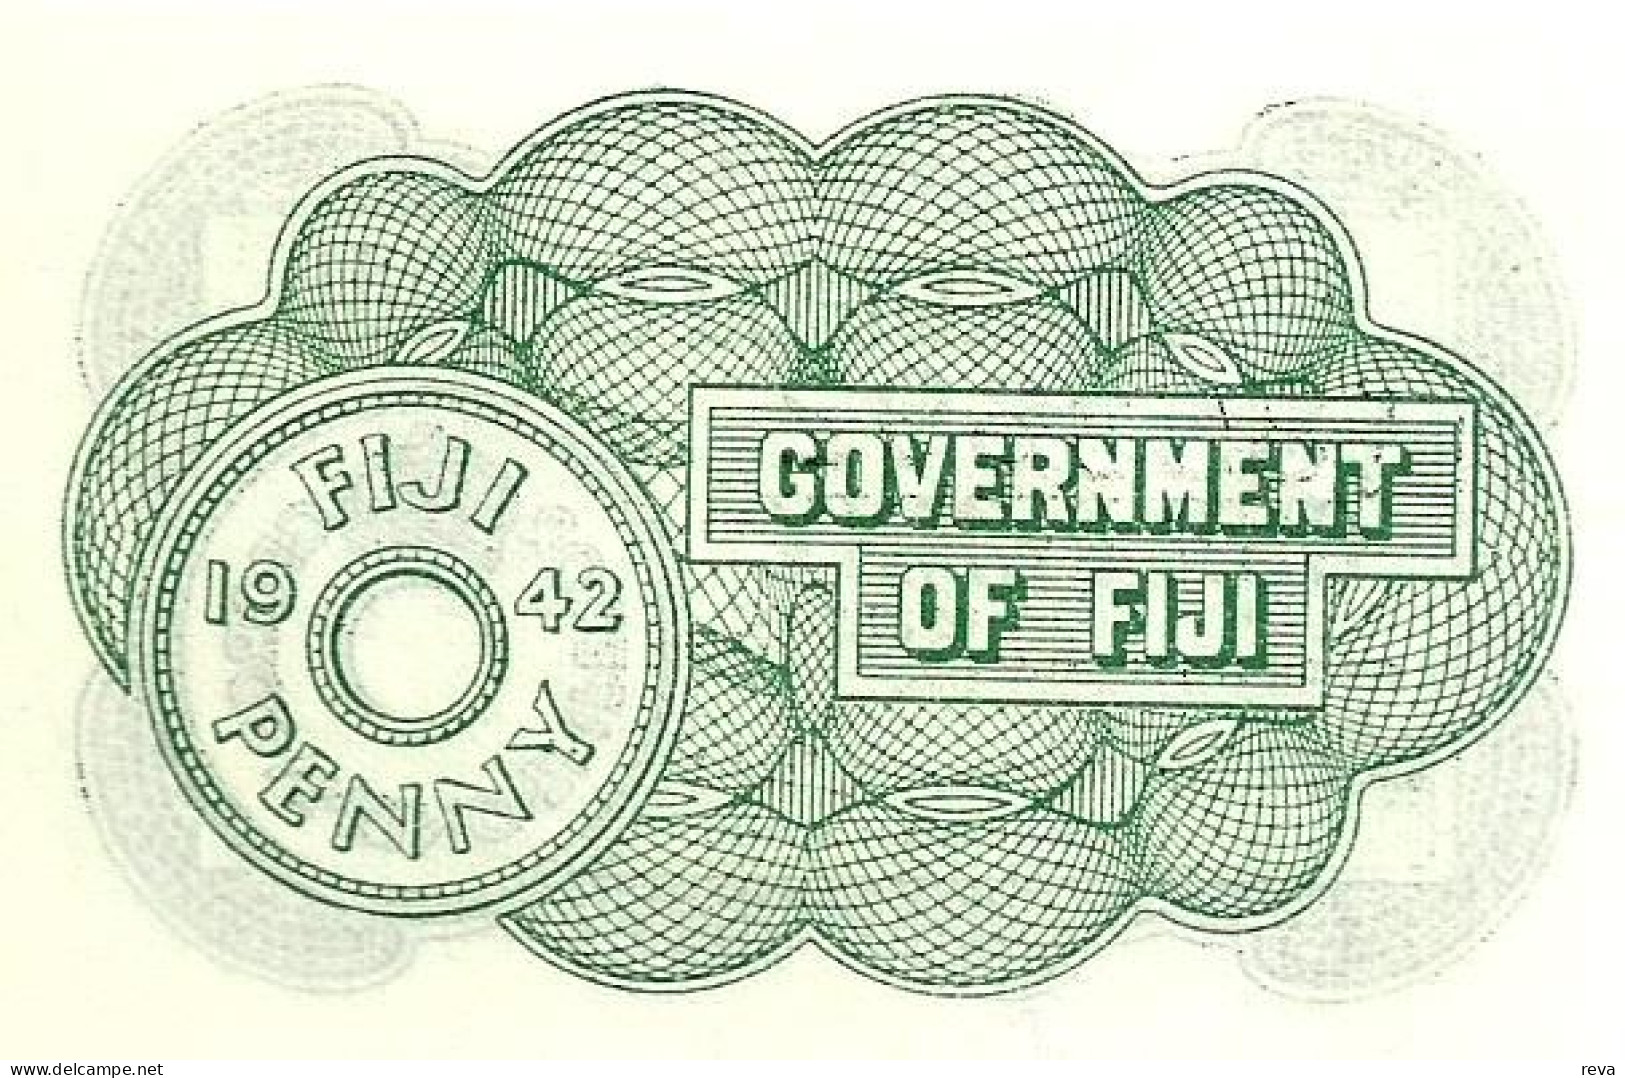 FIJI 1 PENNY GREEN COIN FRONT AND BACK DATED 01-07-1942 EF P.47a READ DESCRIPTION!! - Figi